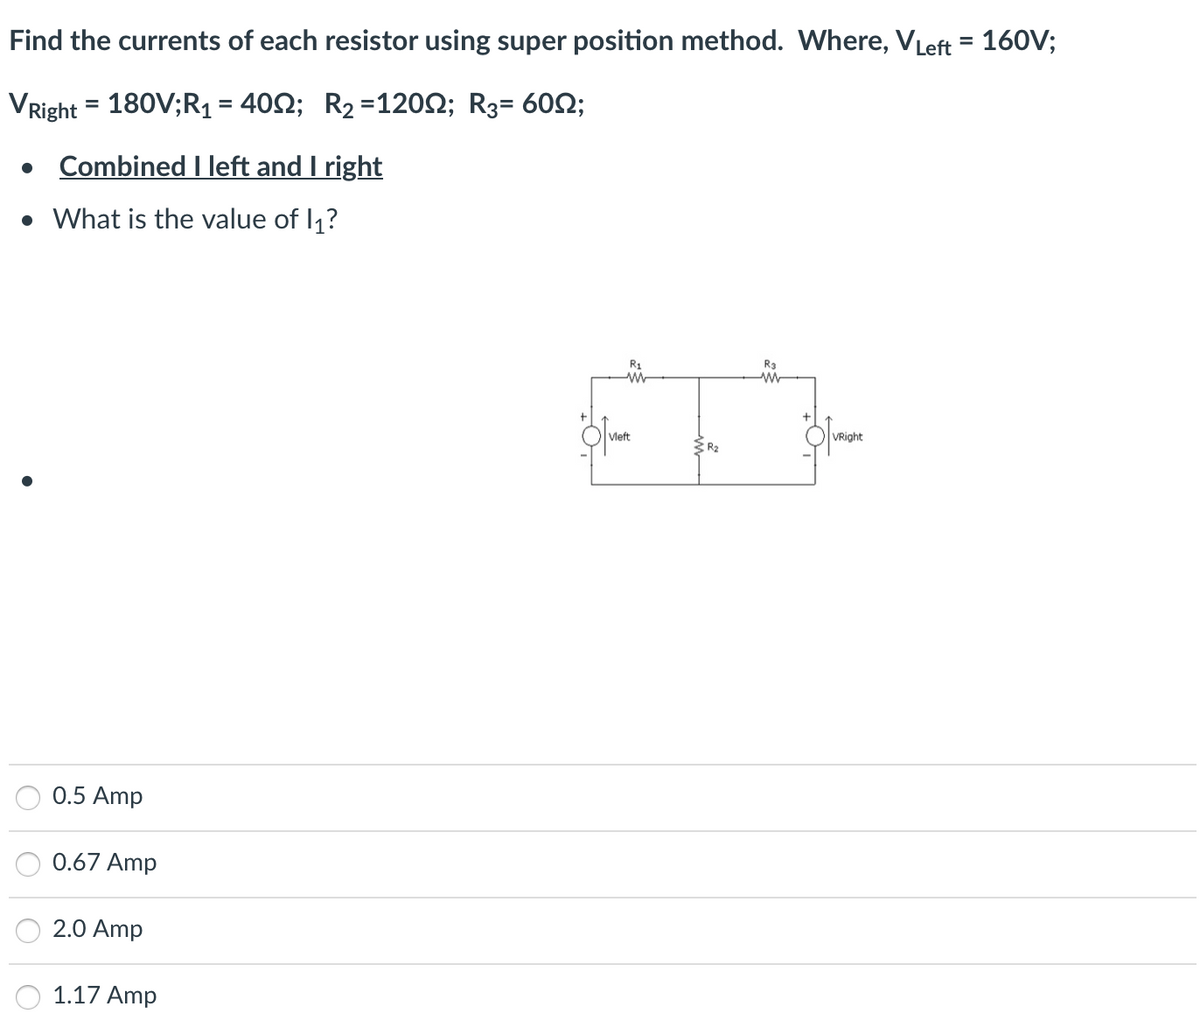 Find the currents of each resistor using super position method. Where, VLeft = 160V;
VRight = 180V;R₁ = 4002; R₂ = 120; R₂= 60;
. Combined I left and I right
• What is the value of 1₁?
0.5 Amp
0.67 Amp
2.0 Amp
1.17 Amp
R₁
www
Vleft
R₂
VRight